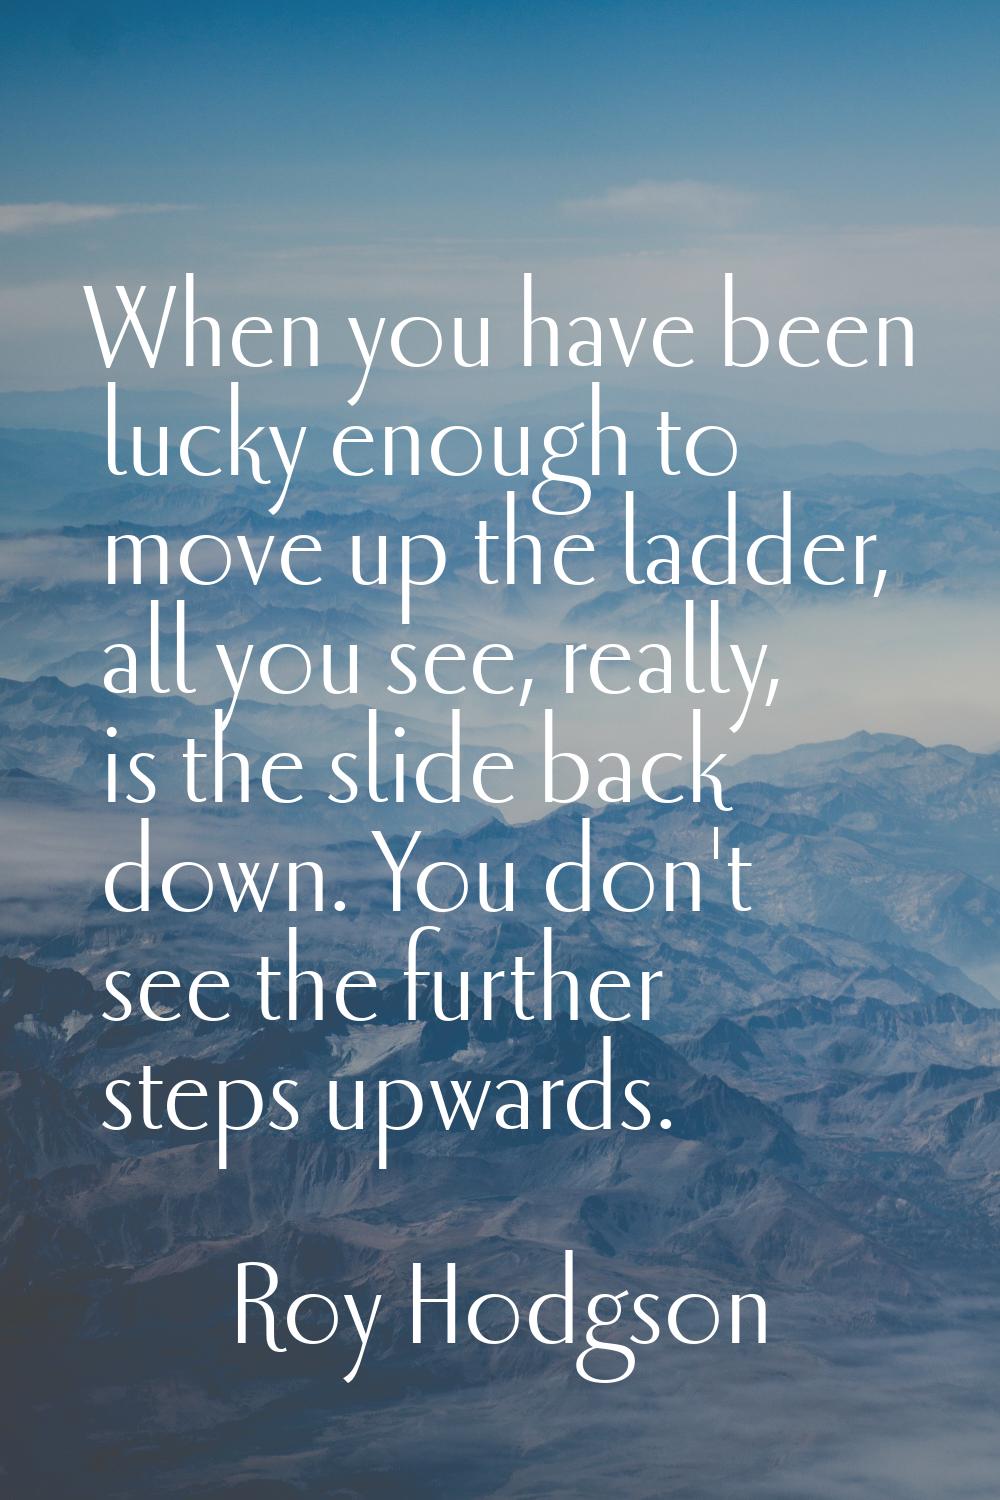 When you have been lucky enough to move up the ladder, all you see, really, is the slide back down.